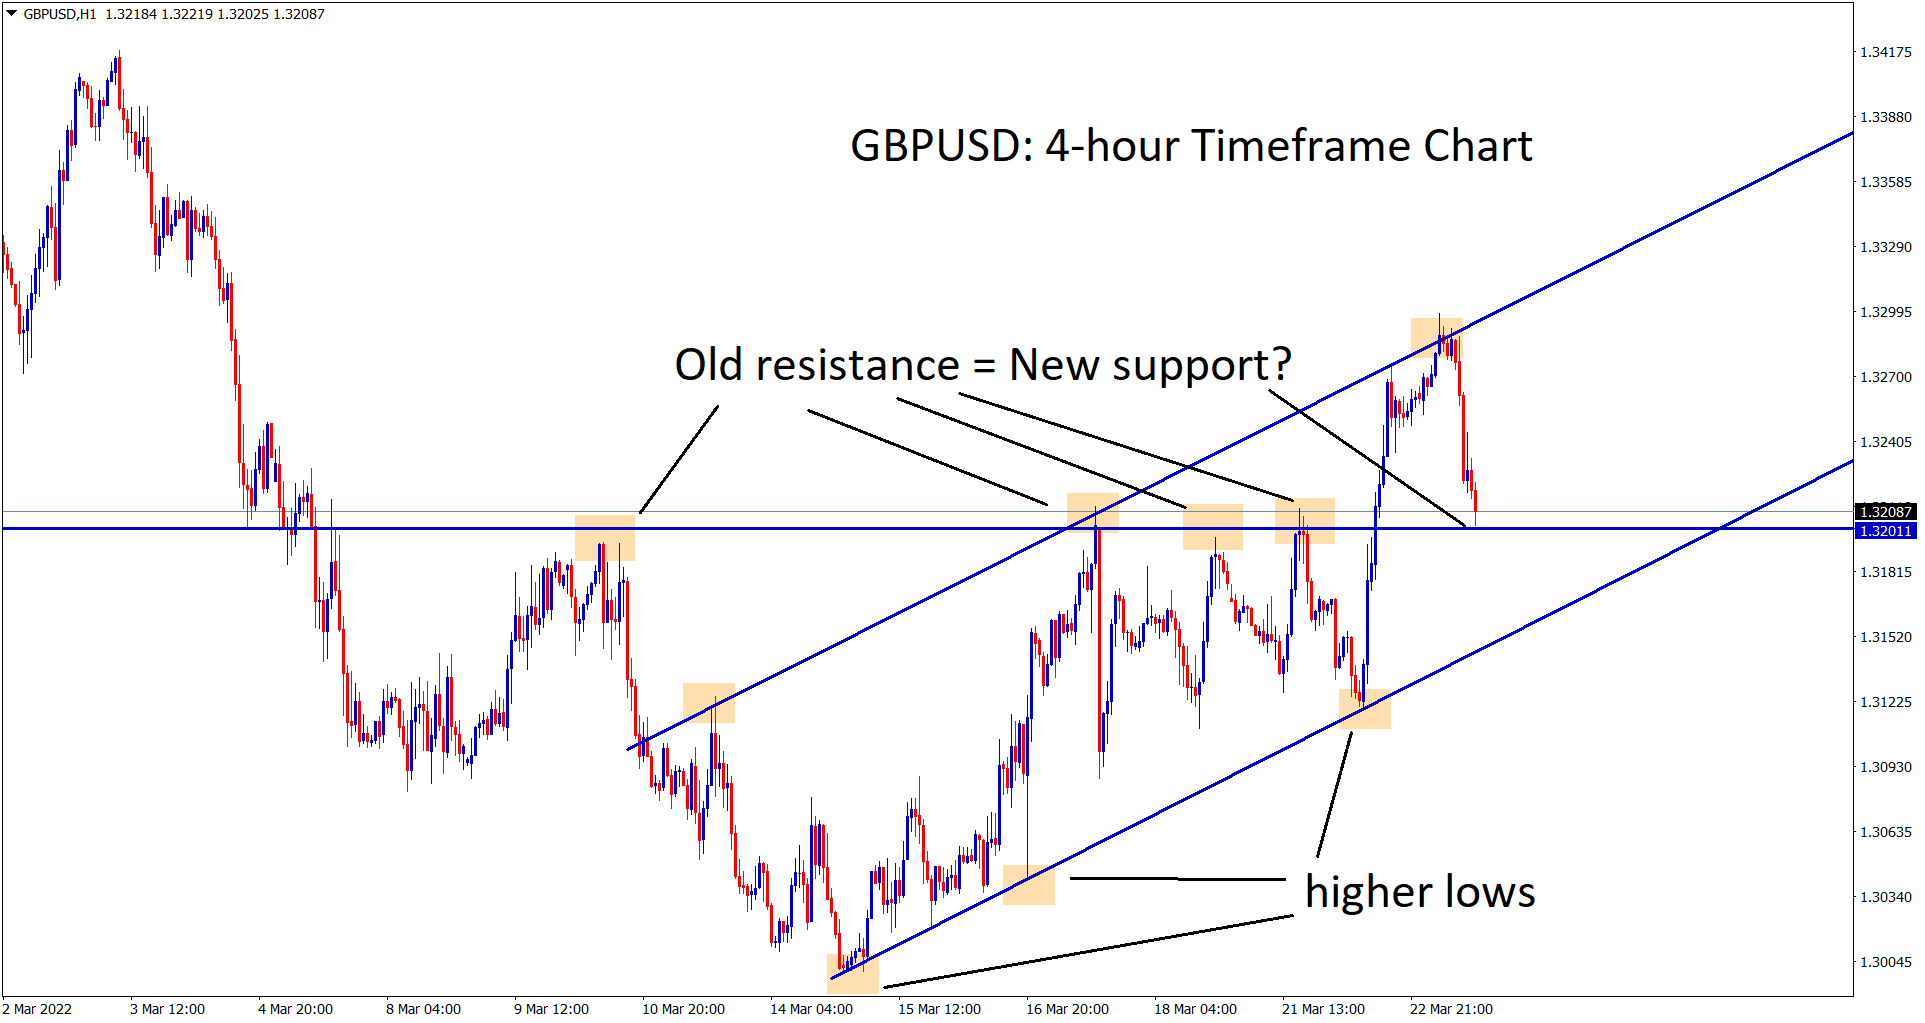 GBPUSD hits the old resistance which have chances to become new support